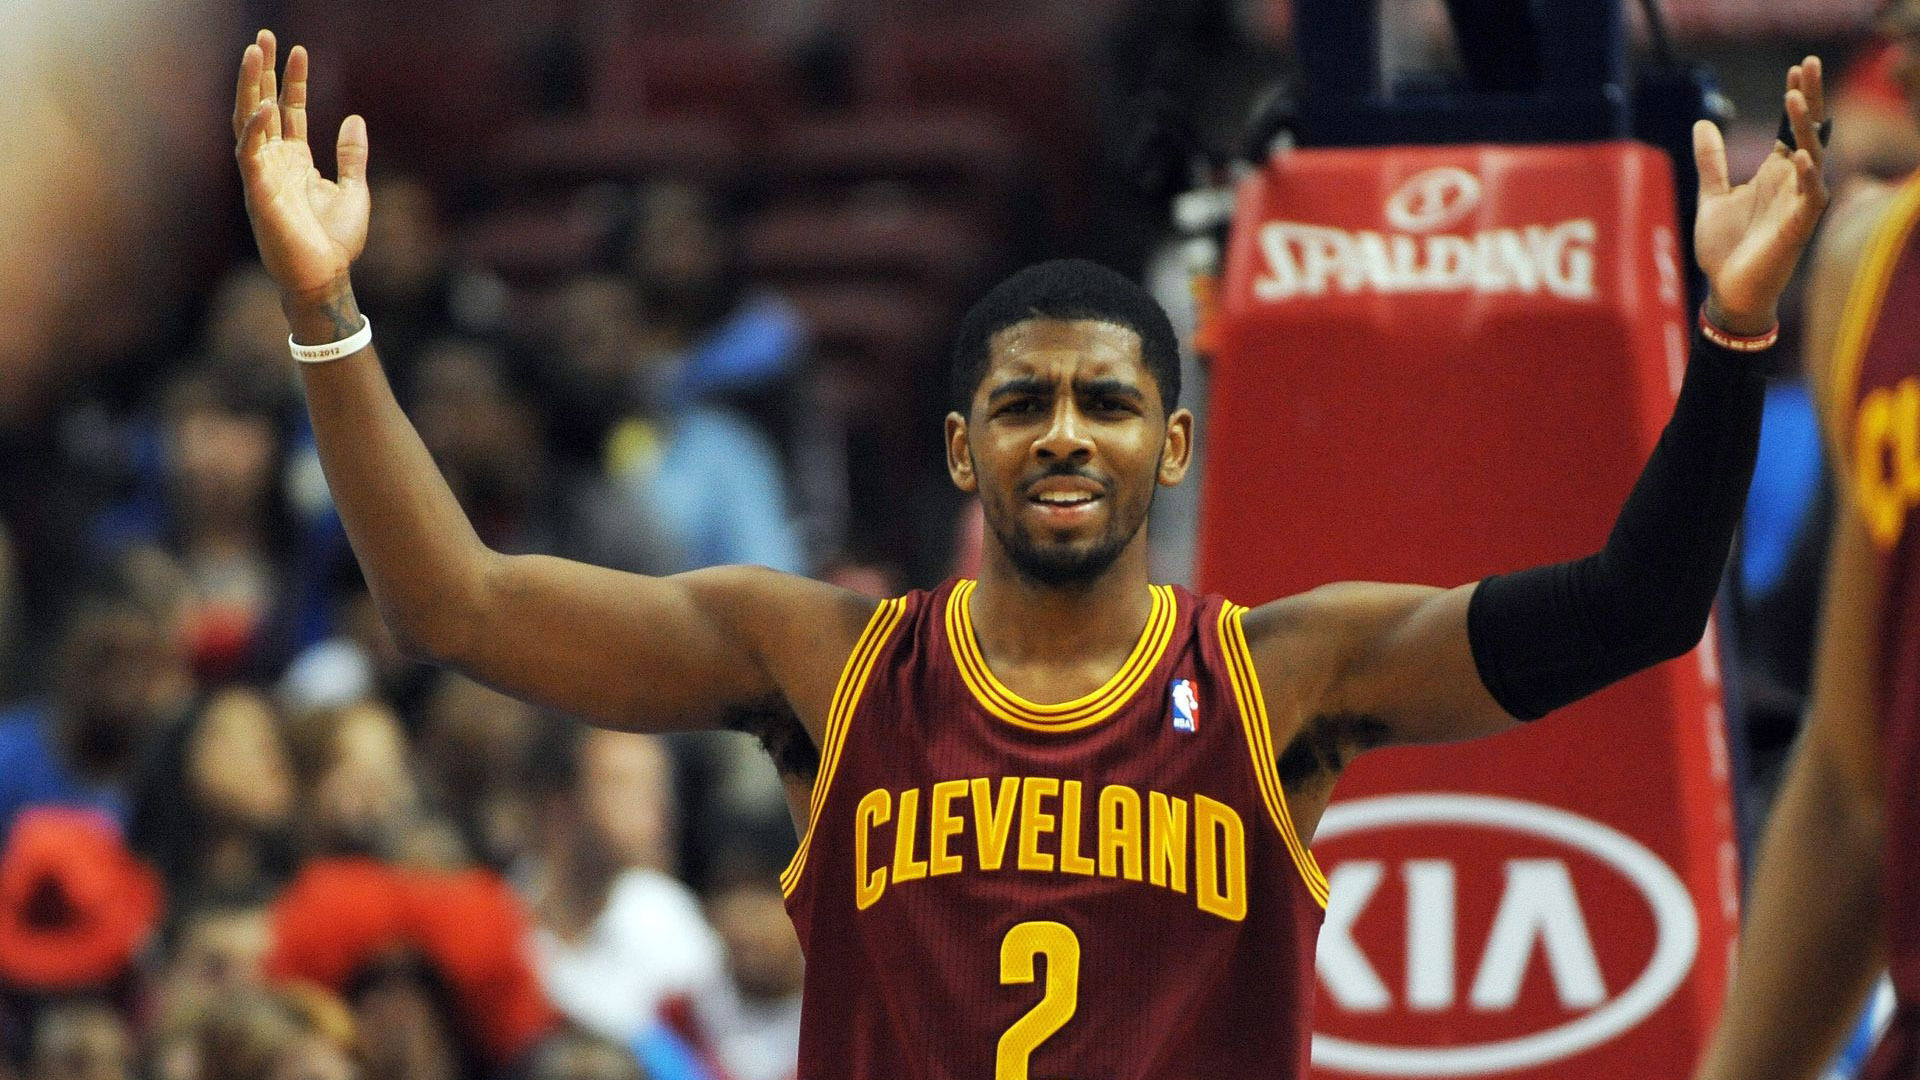 kyrie irving wallpaper,basketball player,product,fan,player,jersey